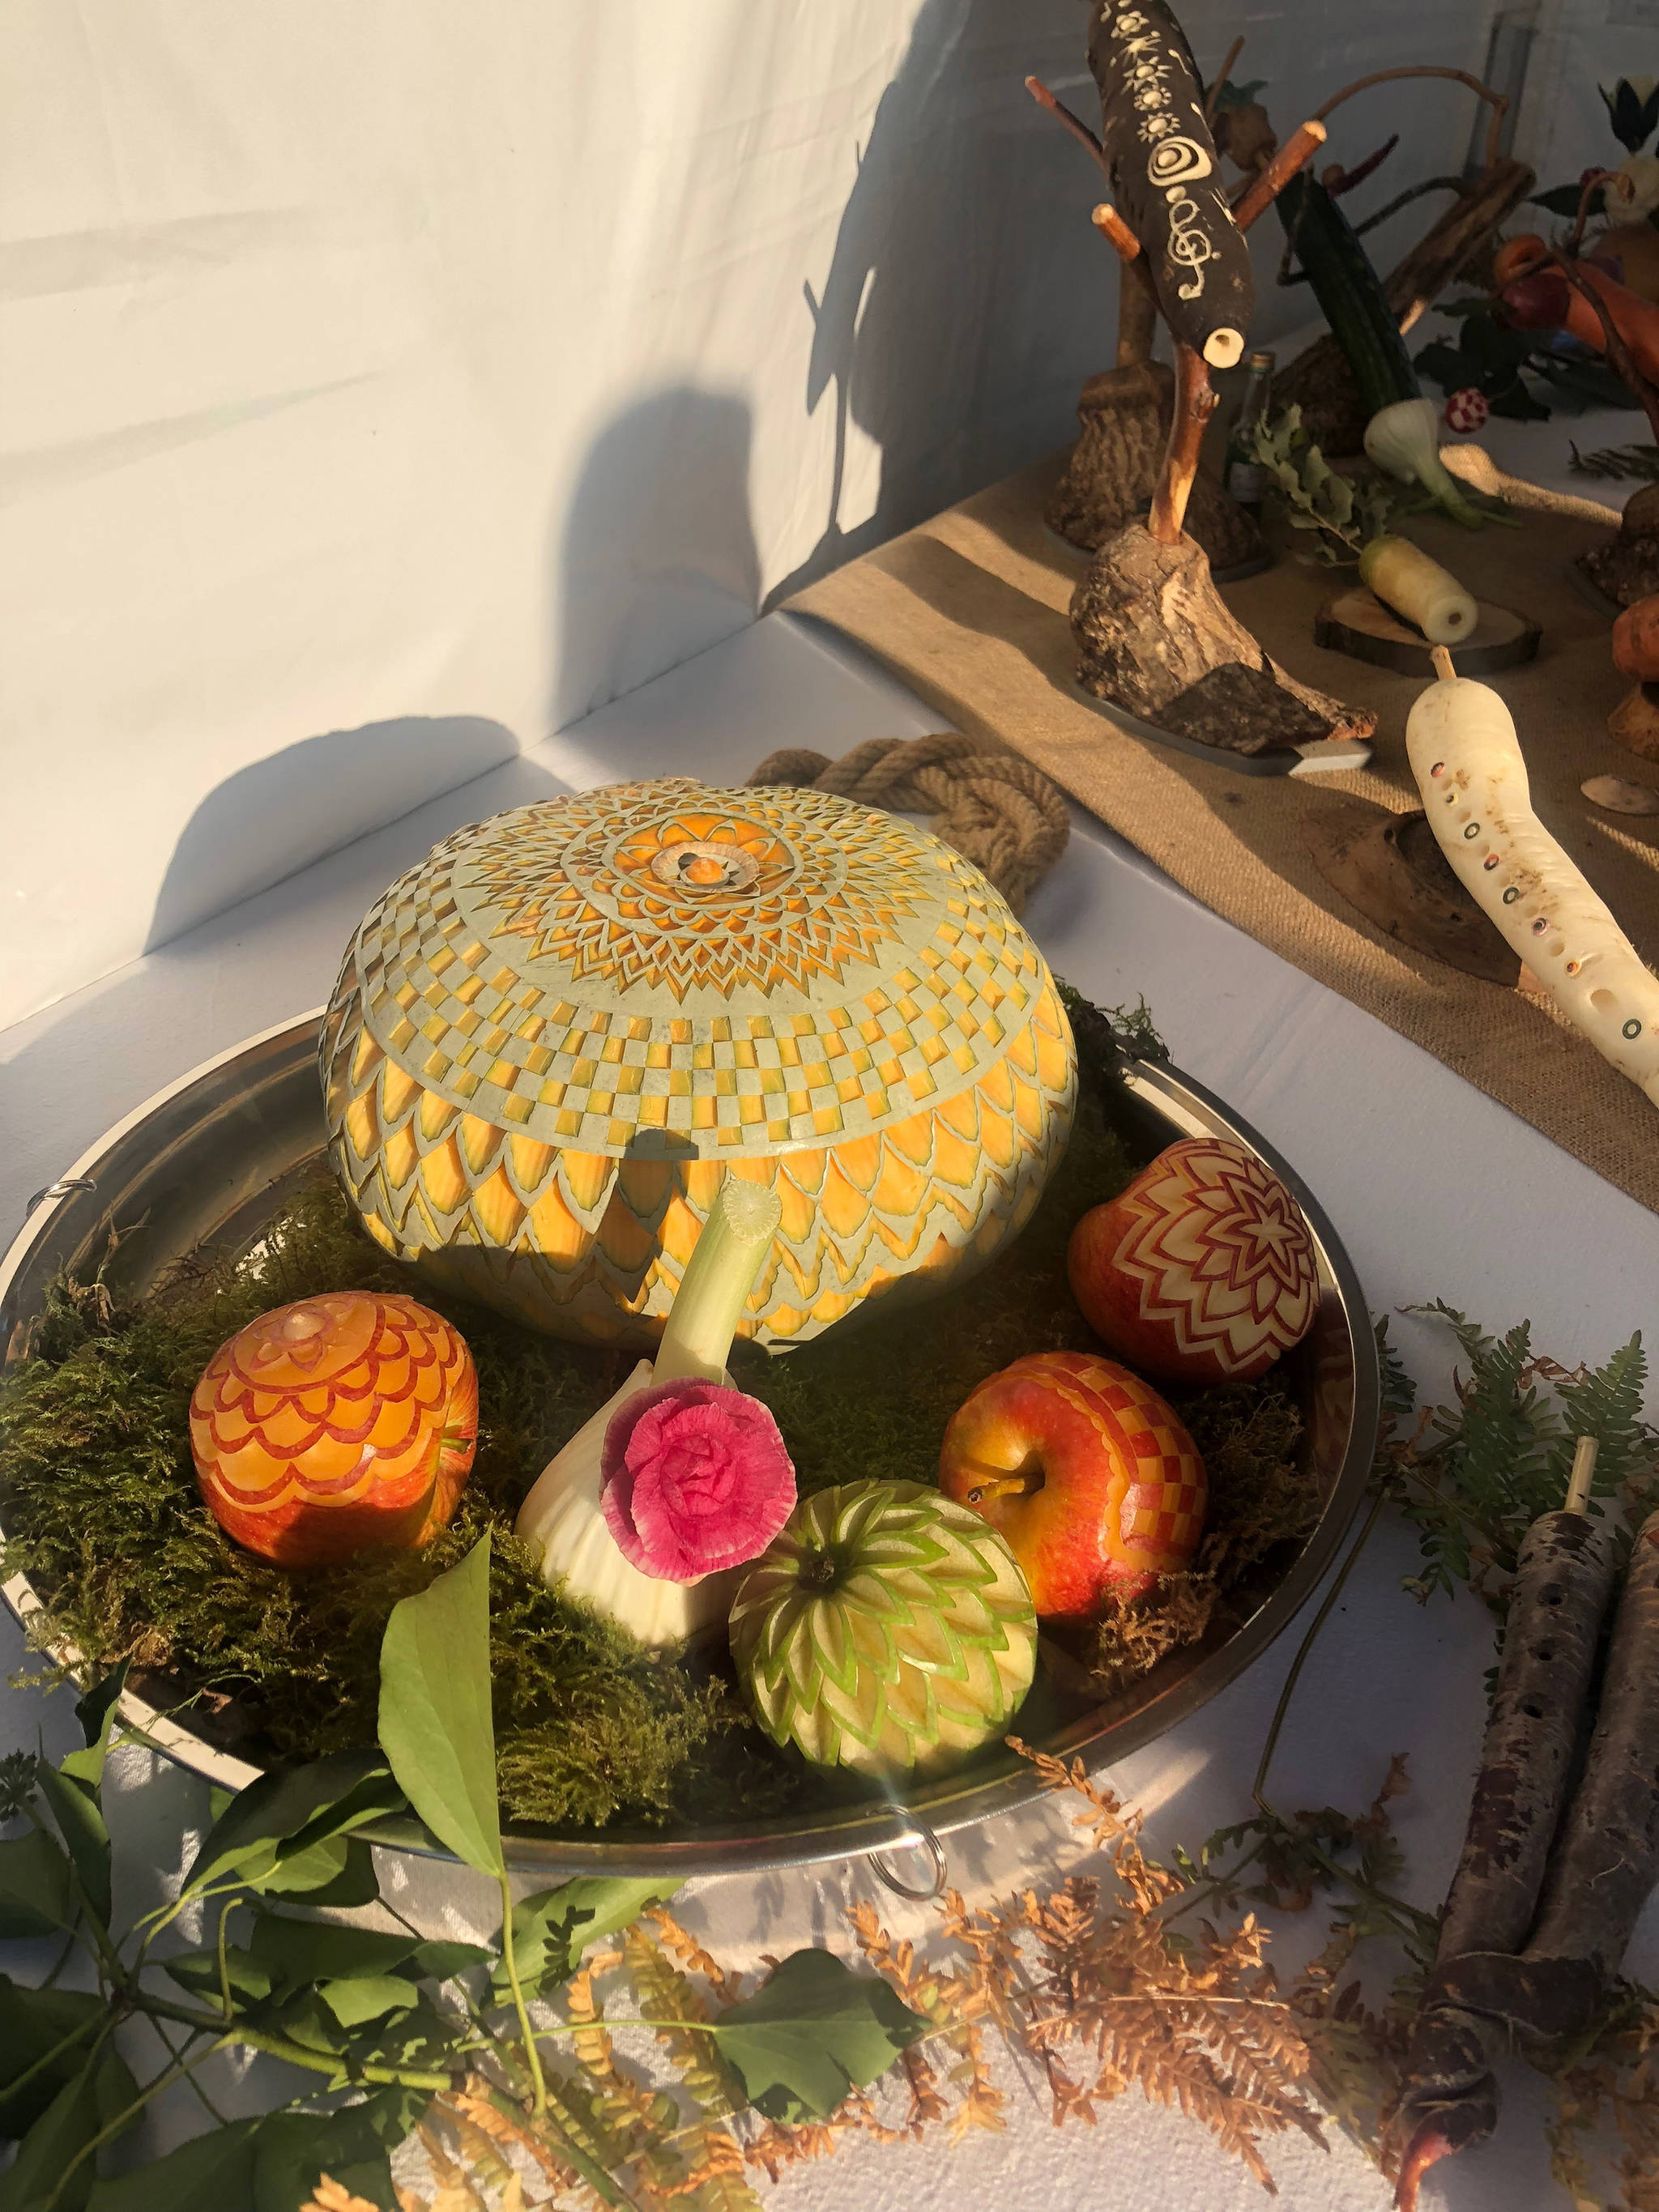 Carved pumpkins and apples on display in an artist’s tent on Oct. 21, 2018. (Bridget McTague | For the Juneau Empire)